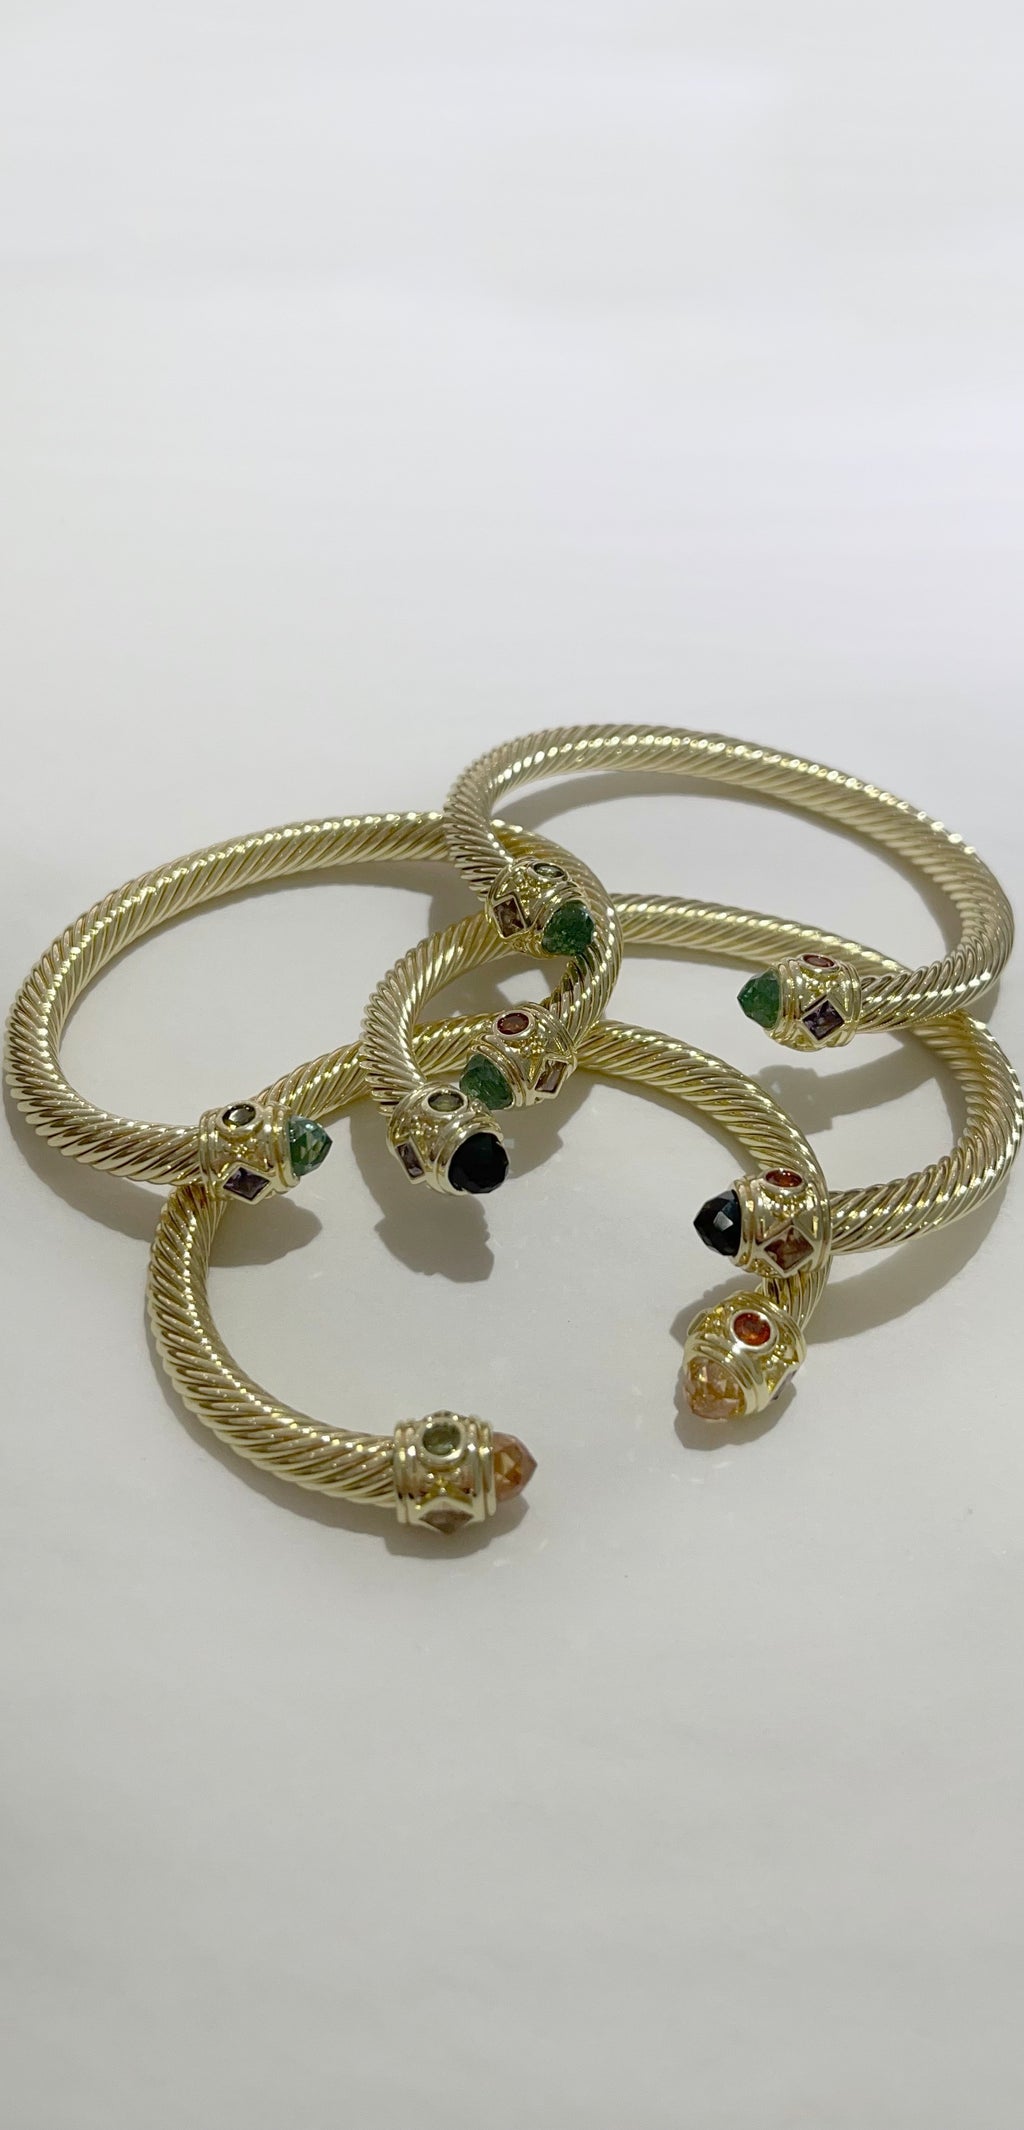 Exceptional Stones Gold Bangle